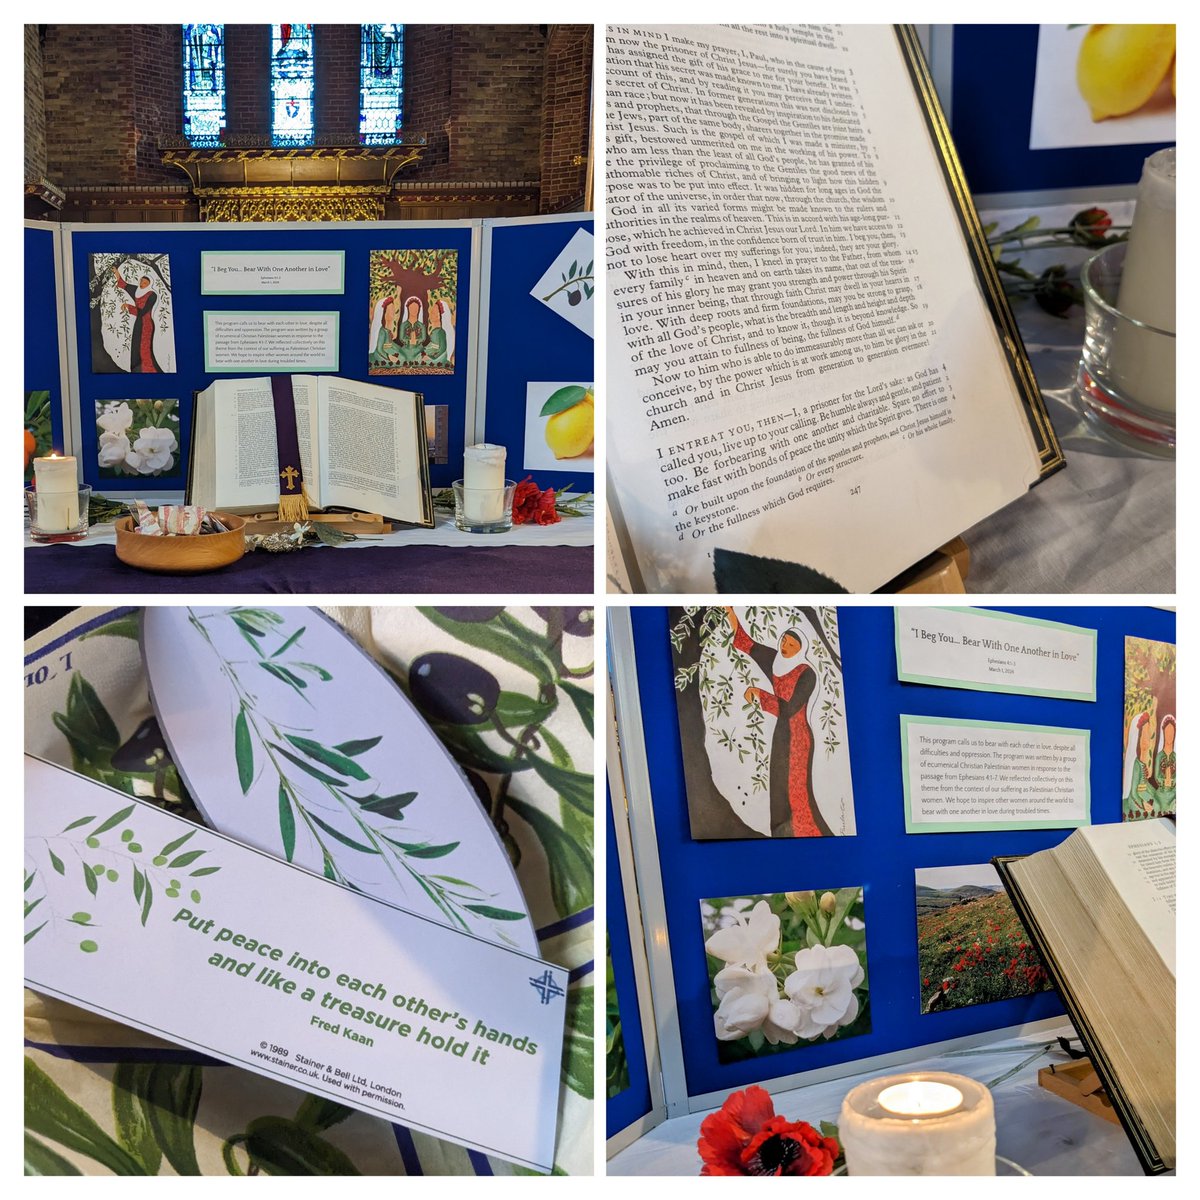 Tonight @CCCFalklands joined countless others from across the globe in #WorldDayofPrayer, with a service written by the Christian women of Palestine. We give thanks for our chance to pray, reflect, lament, rejoice and stand in solidarity with our Christian siblings everywhere.